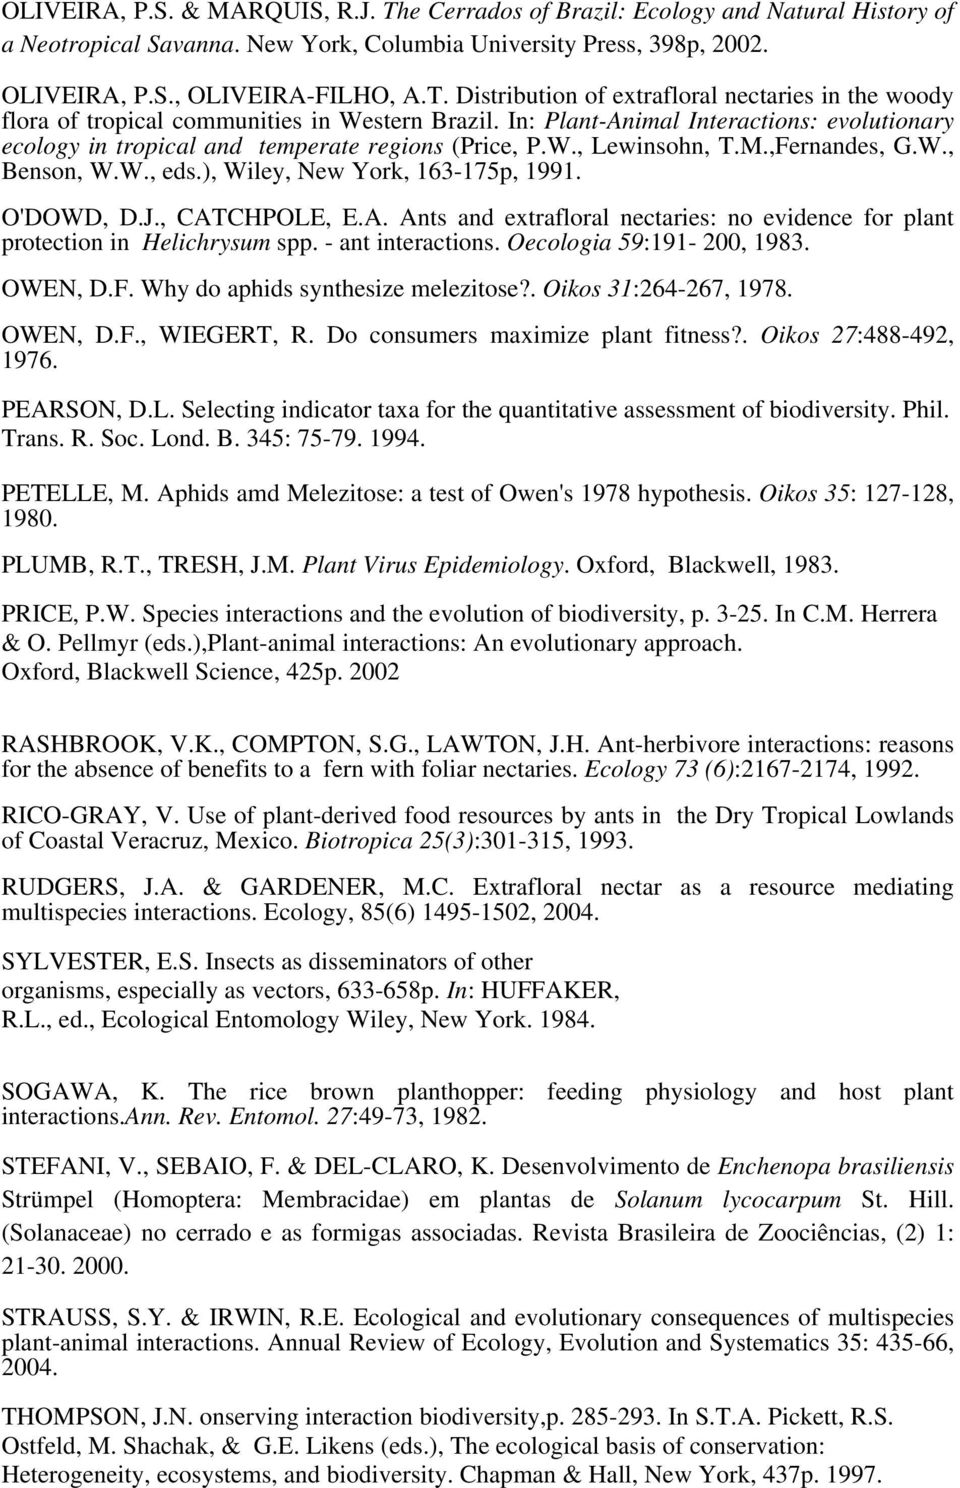 , CATCHPOLE, E.A. Ants and extrafloral nectaries: no evidence for plant protection in Helichrysum spp. - ant interactions. Oecologia 59:191-200, 1983. OWEN, D.F. Why do aphids synthesize melezitose?